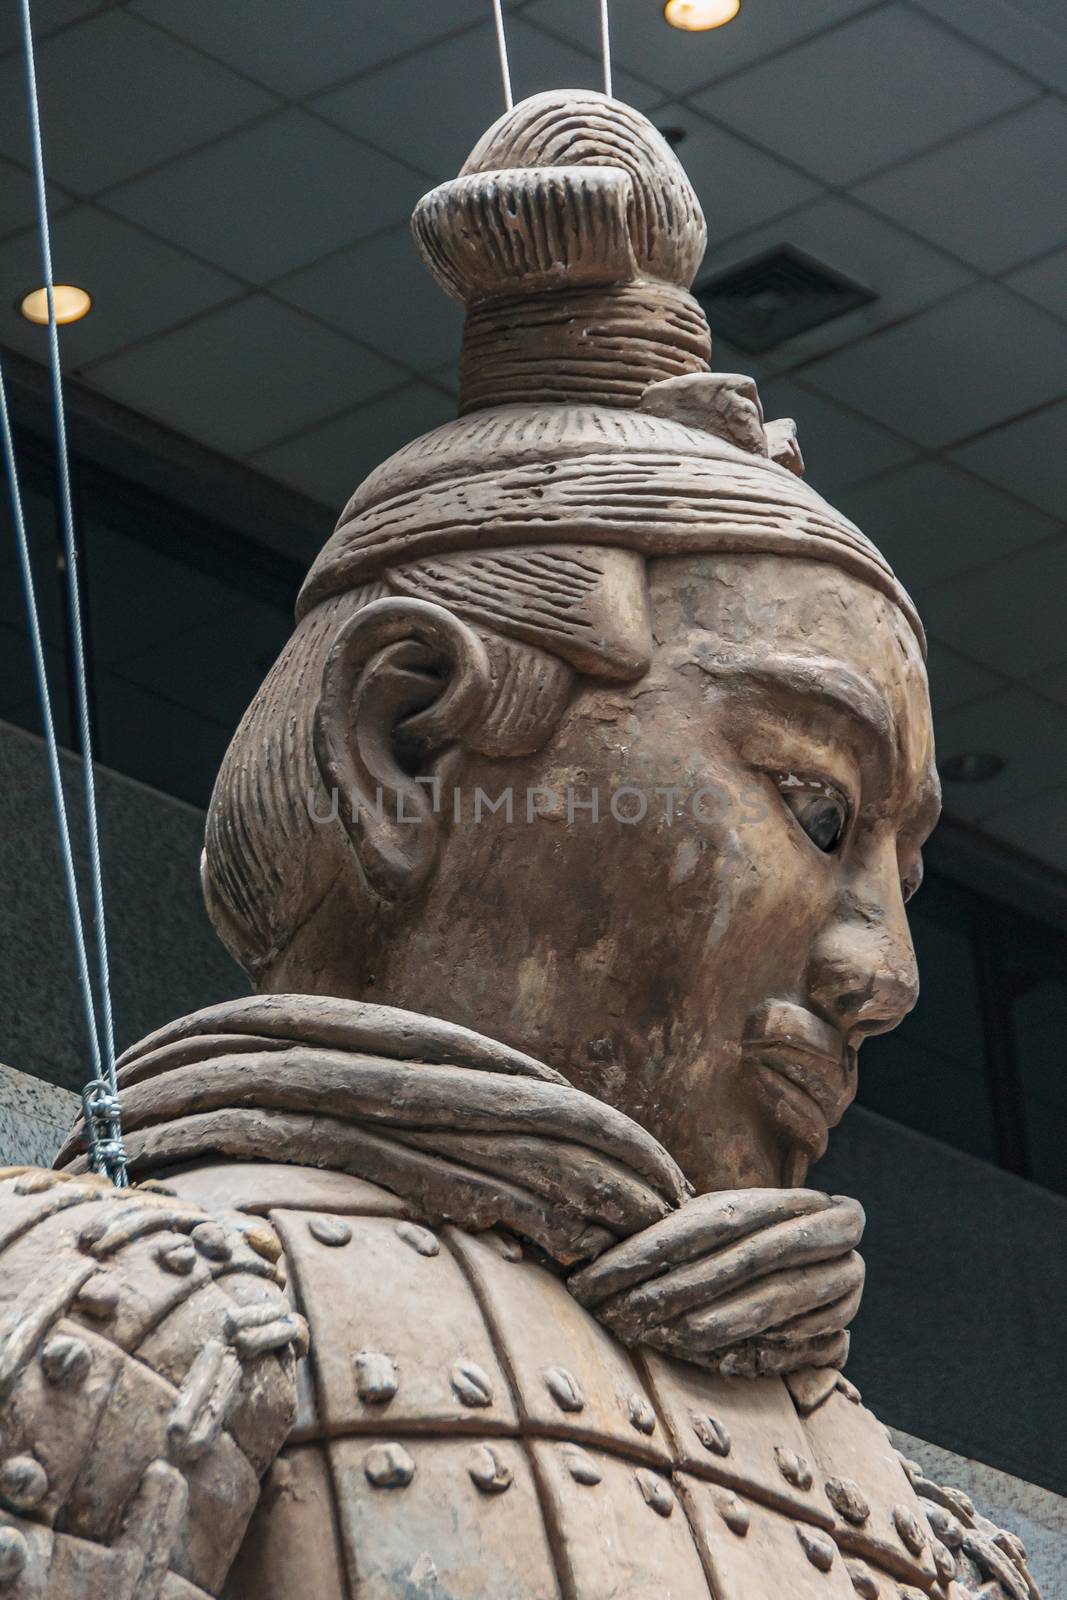 Head of Giant Officer sculpture at Terracotta Army museum, Xian, by Claudine